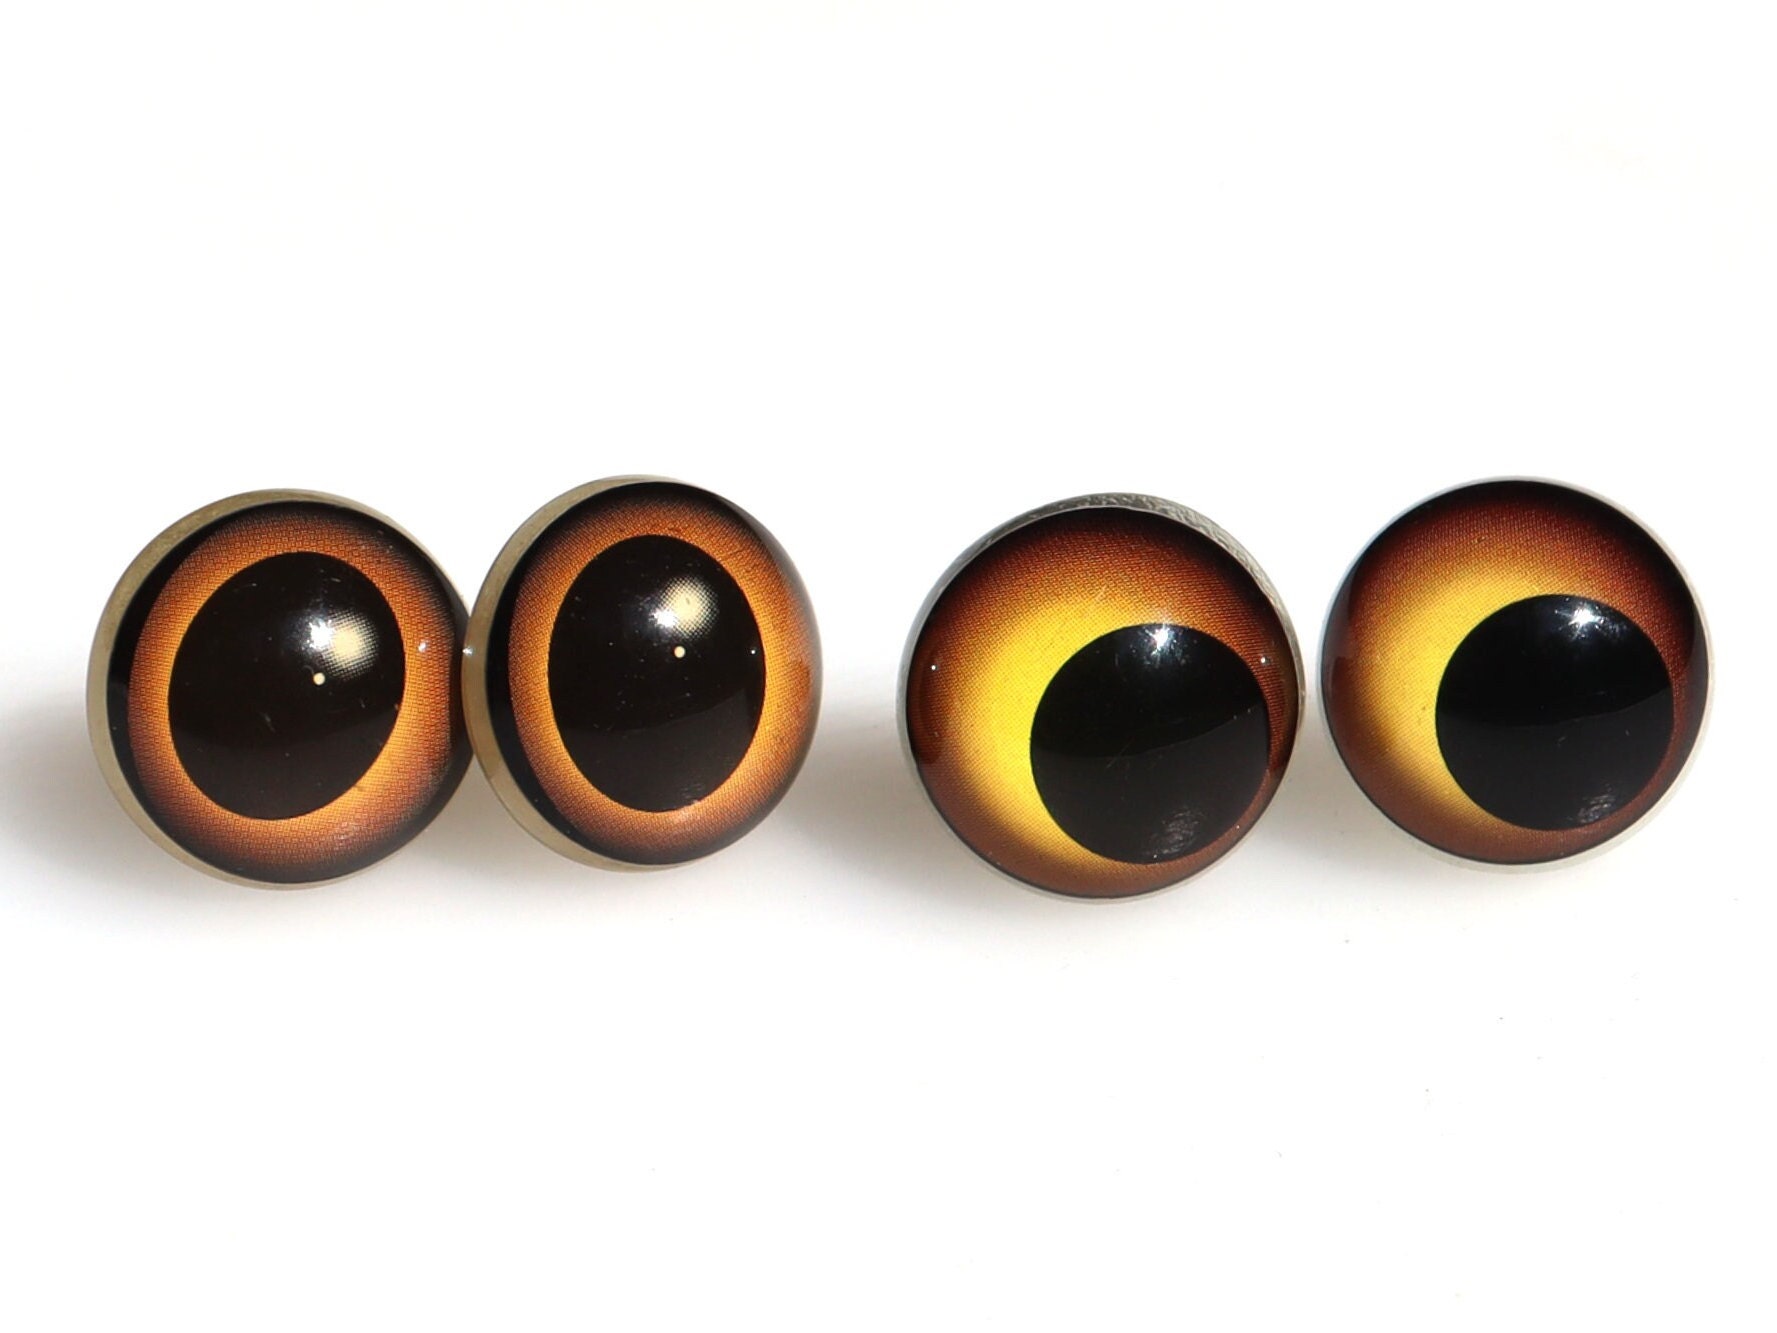 16mm x 20mm Toy Safety Eyes Dollmaking Oval Black and White Eyes